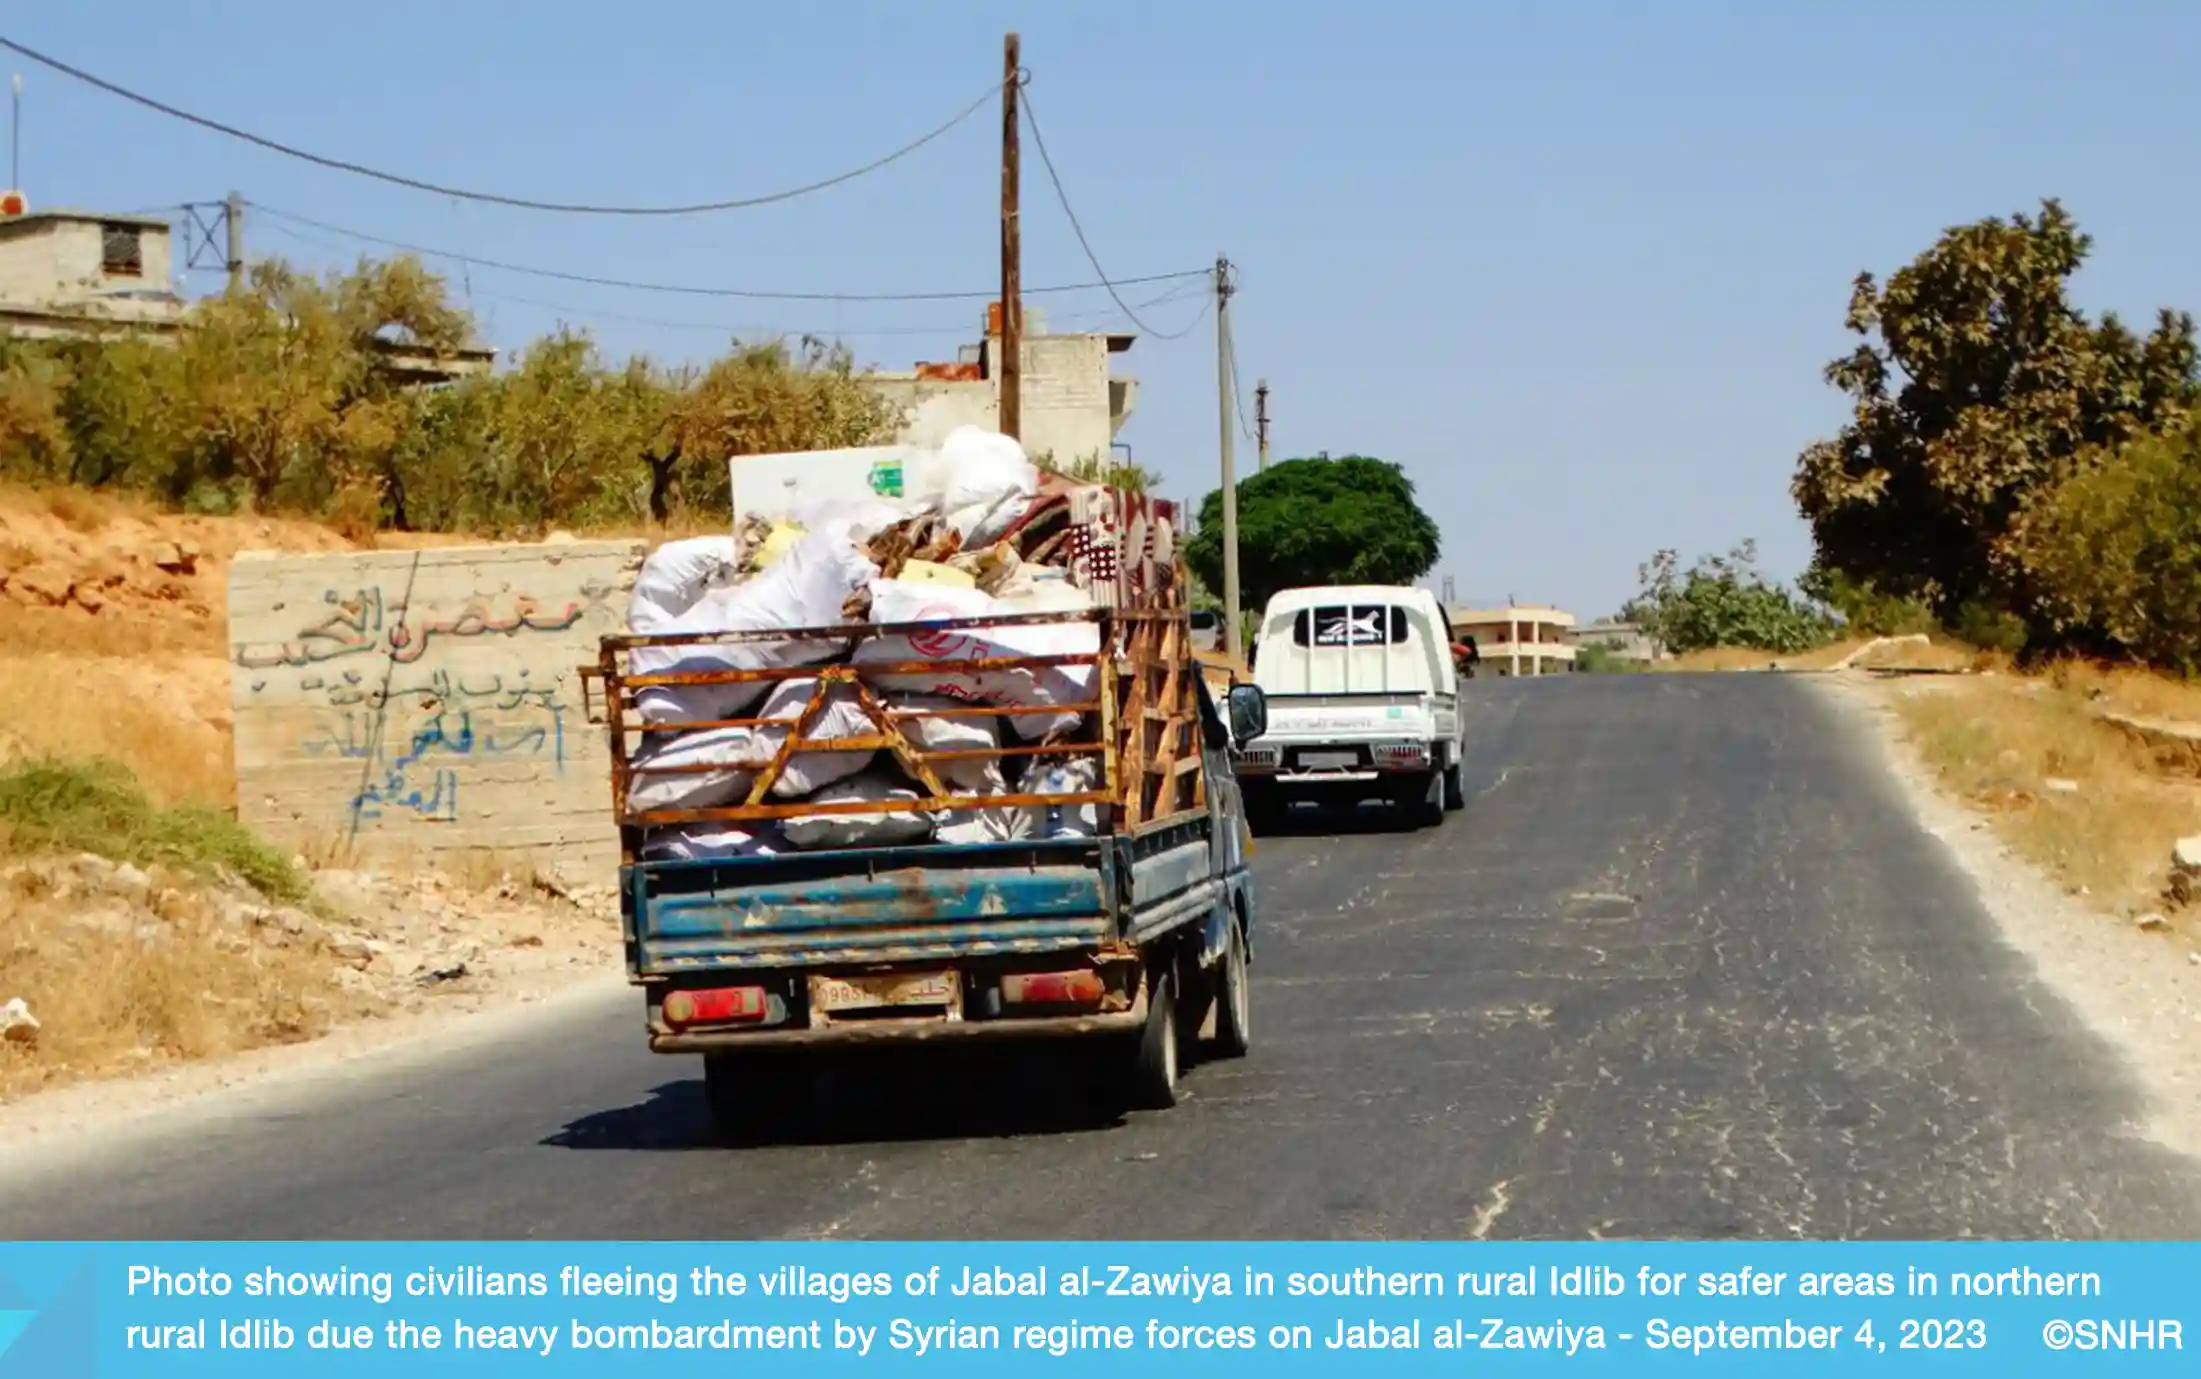 Civilians flee villages and towns in rural Idlib to escape intensified bombardment by Syrian regime forces, September 4, 2023